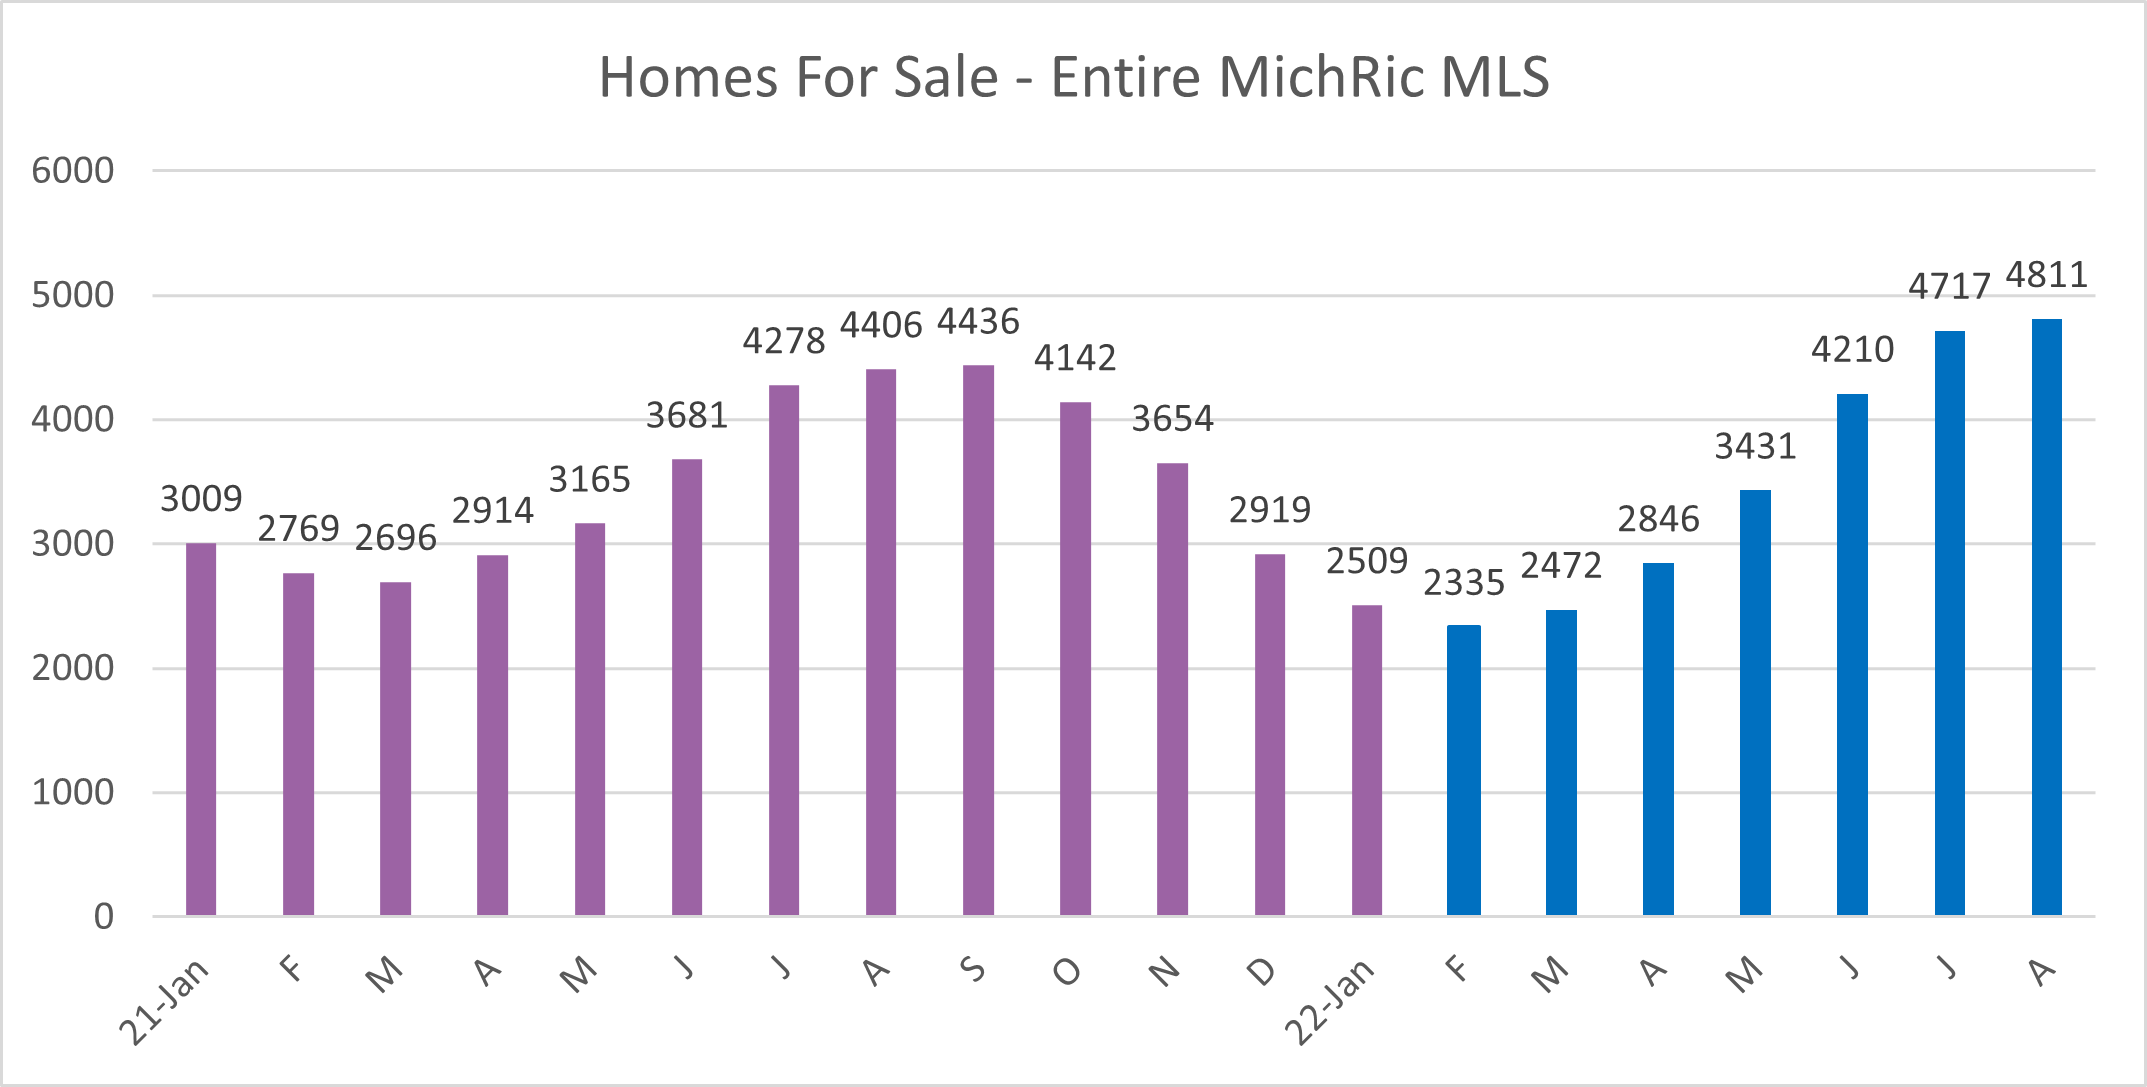 A graph showing the number of homes for sale in the entire MichRic MLS